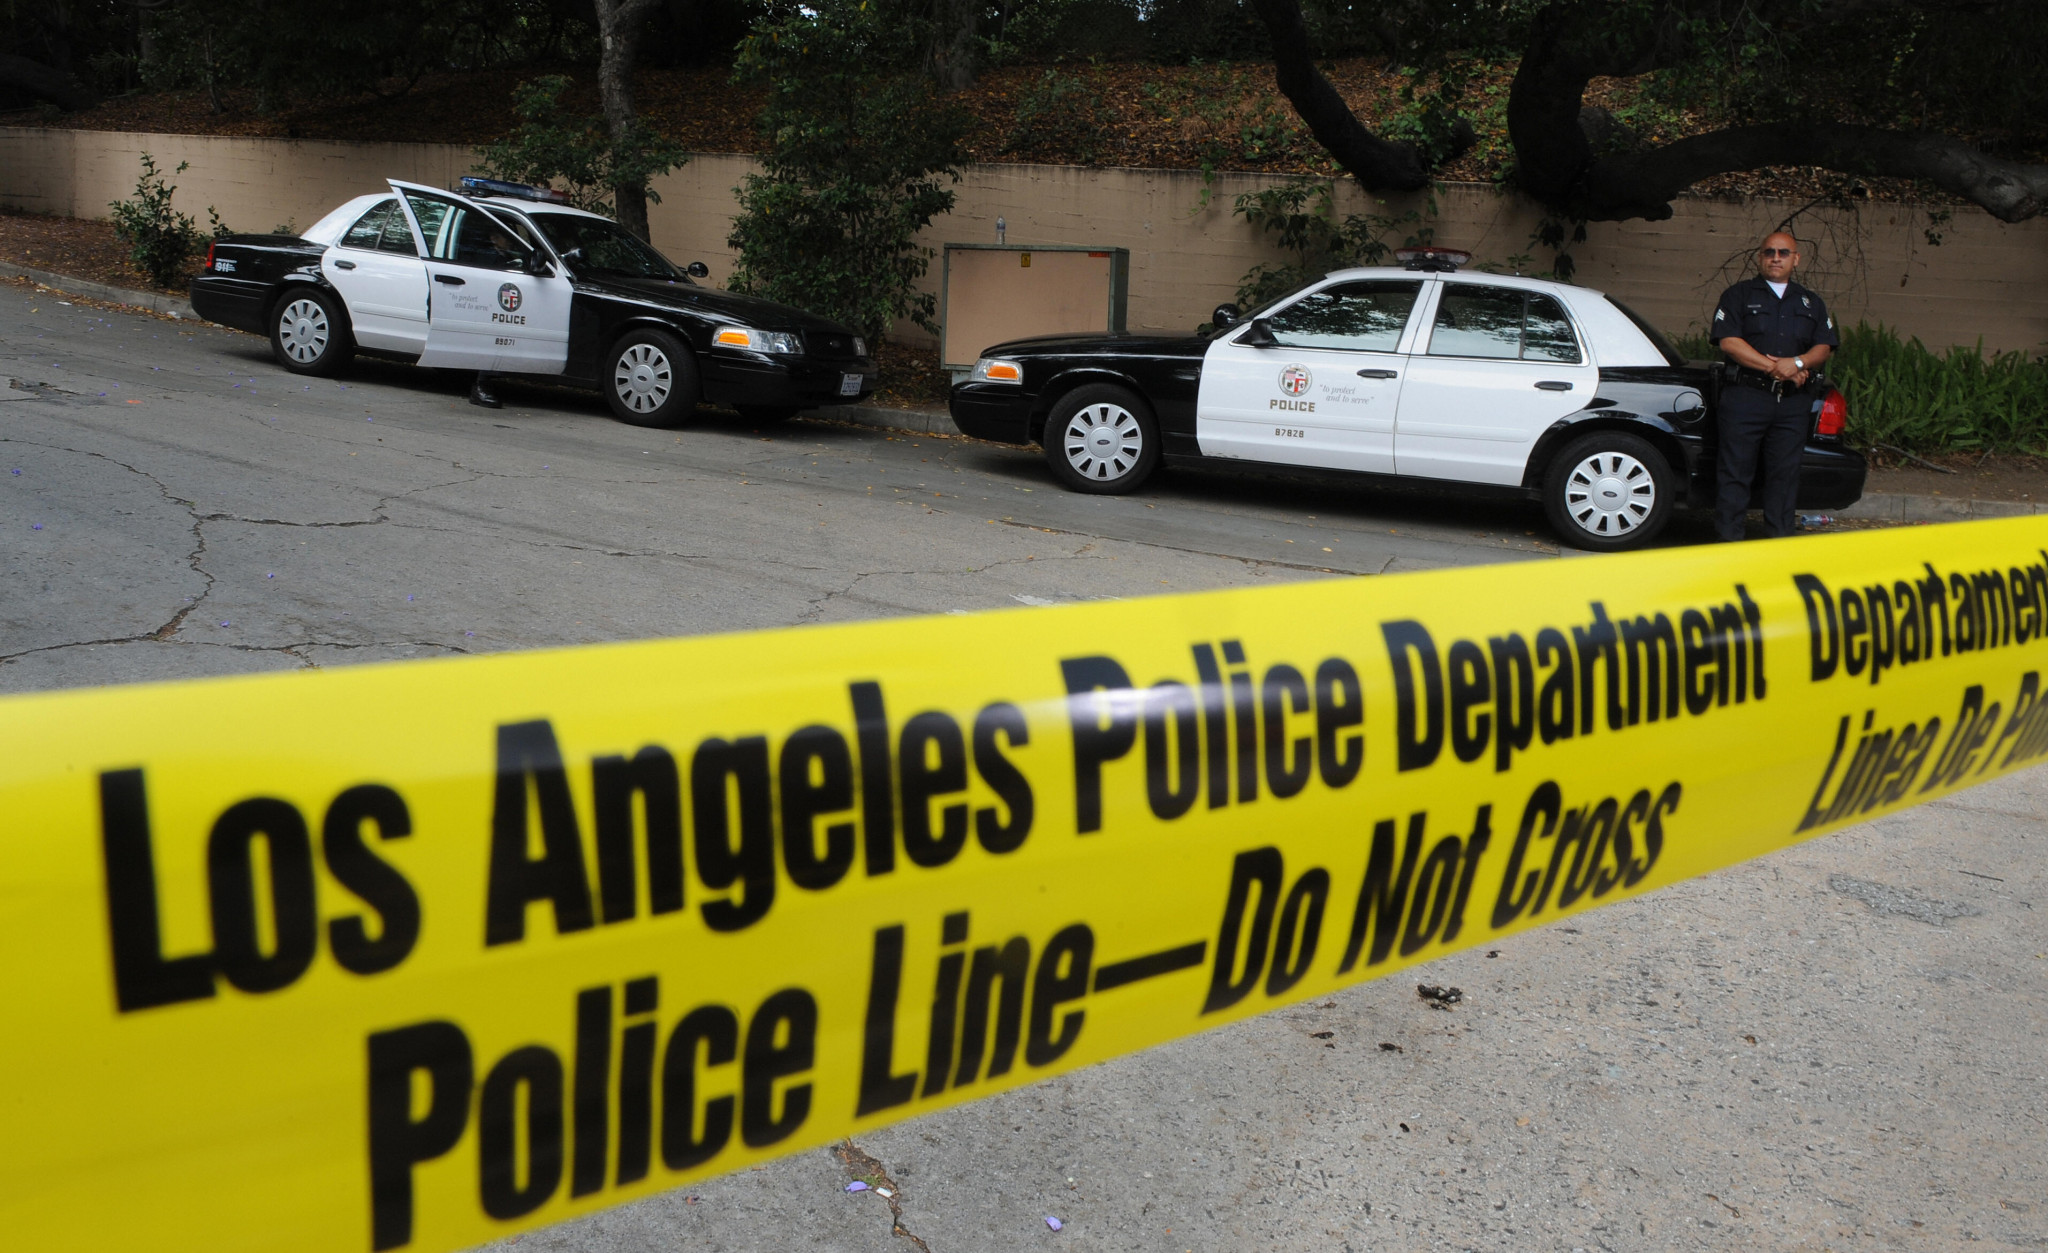 The Los Angeles Police Department is suffering a decline in new recruits which is causing security concerns prior to the 2028 Olympic and Paralympic Games ©Getty Images